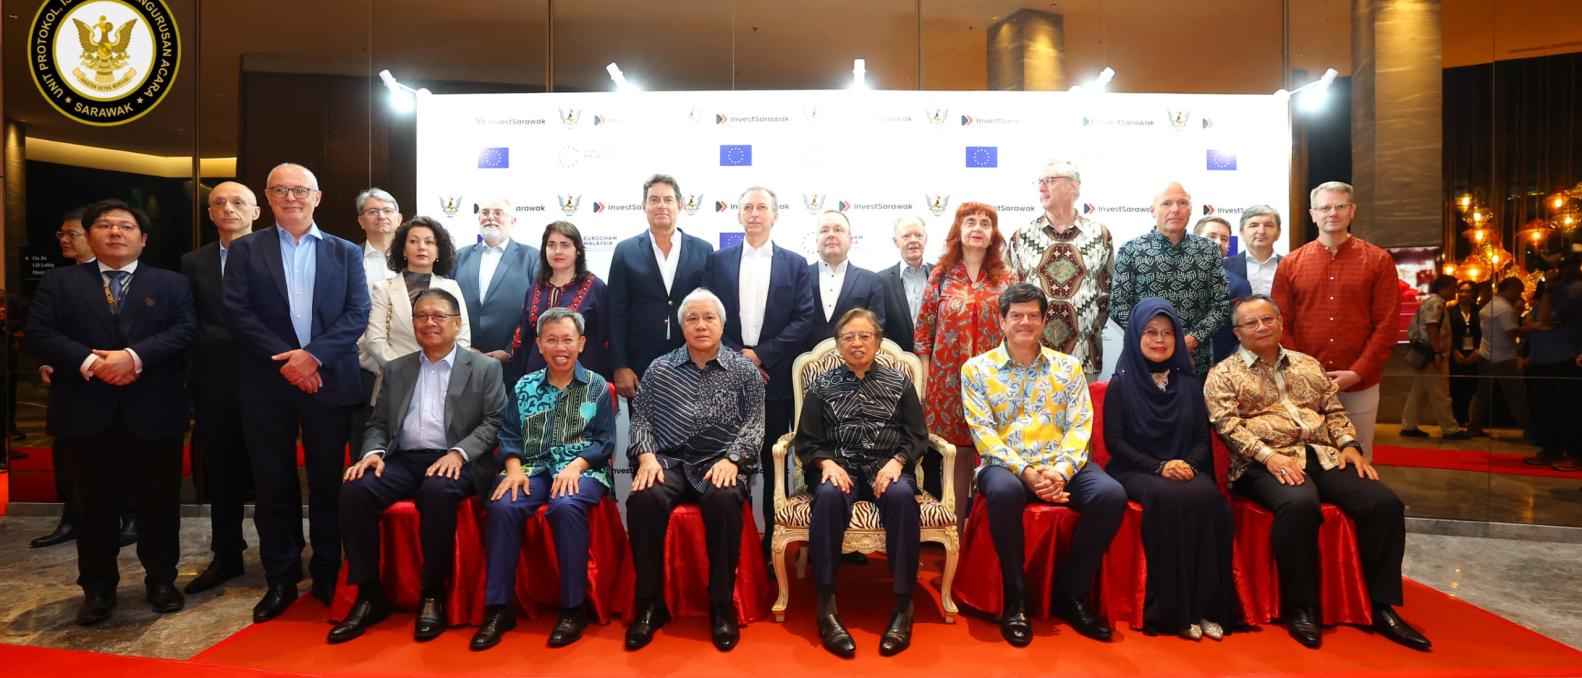 17 EU Ambassadors together with the Premier of Sarawak sitting in front of a backdrop